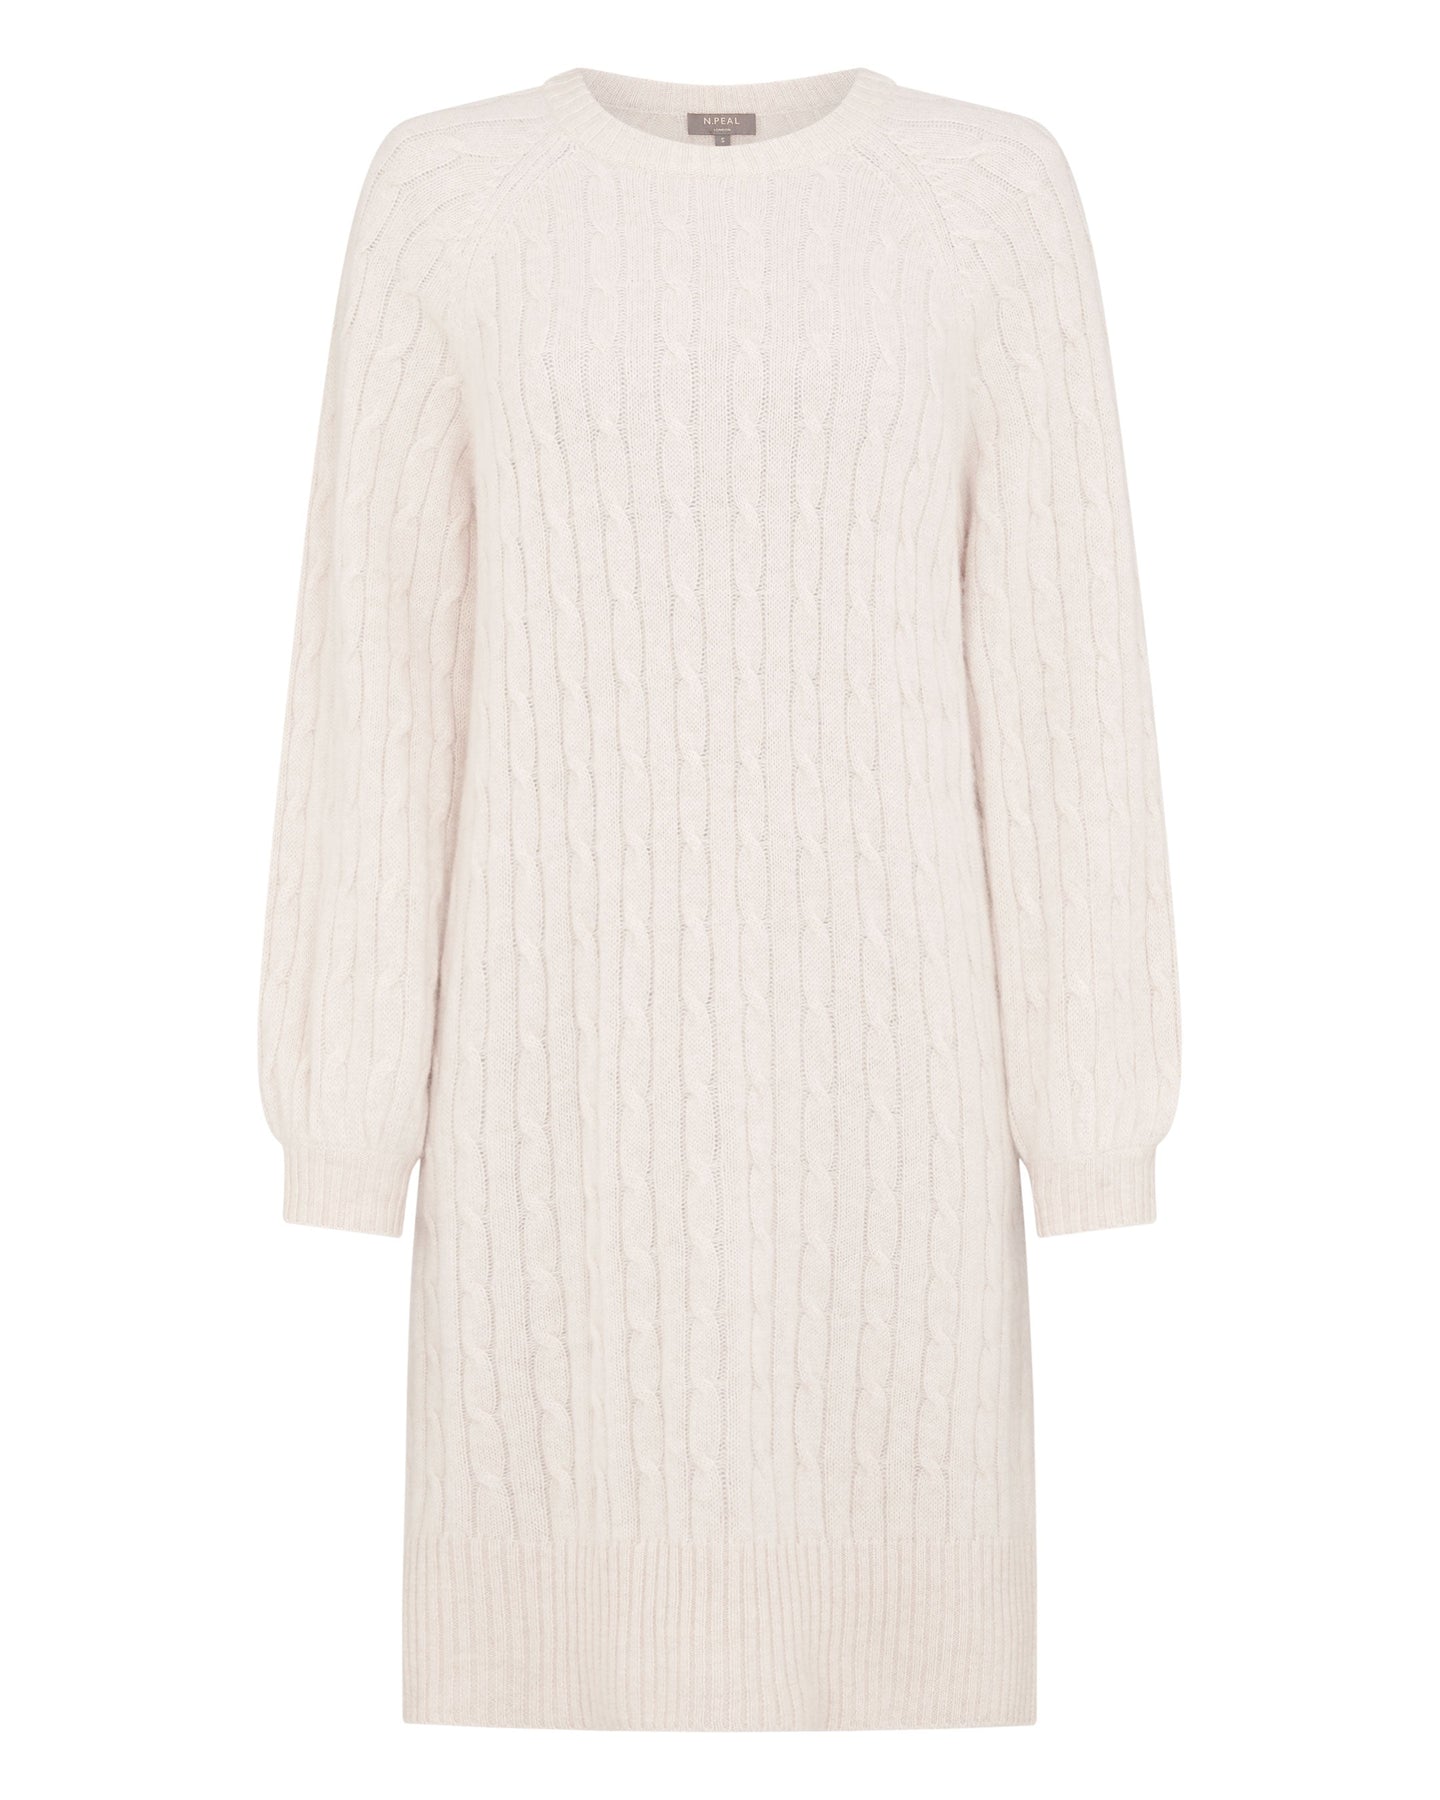 N.Peal Women's Crew Neck Cable Cashmere Dress Ecru White